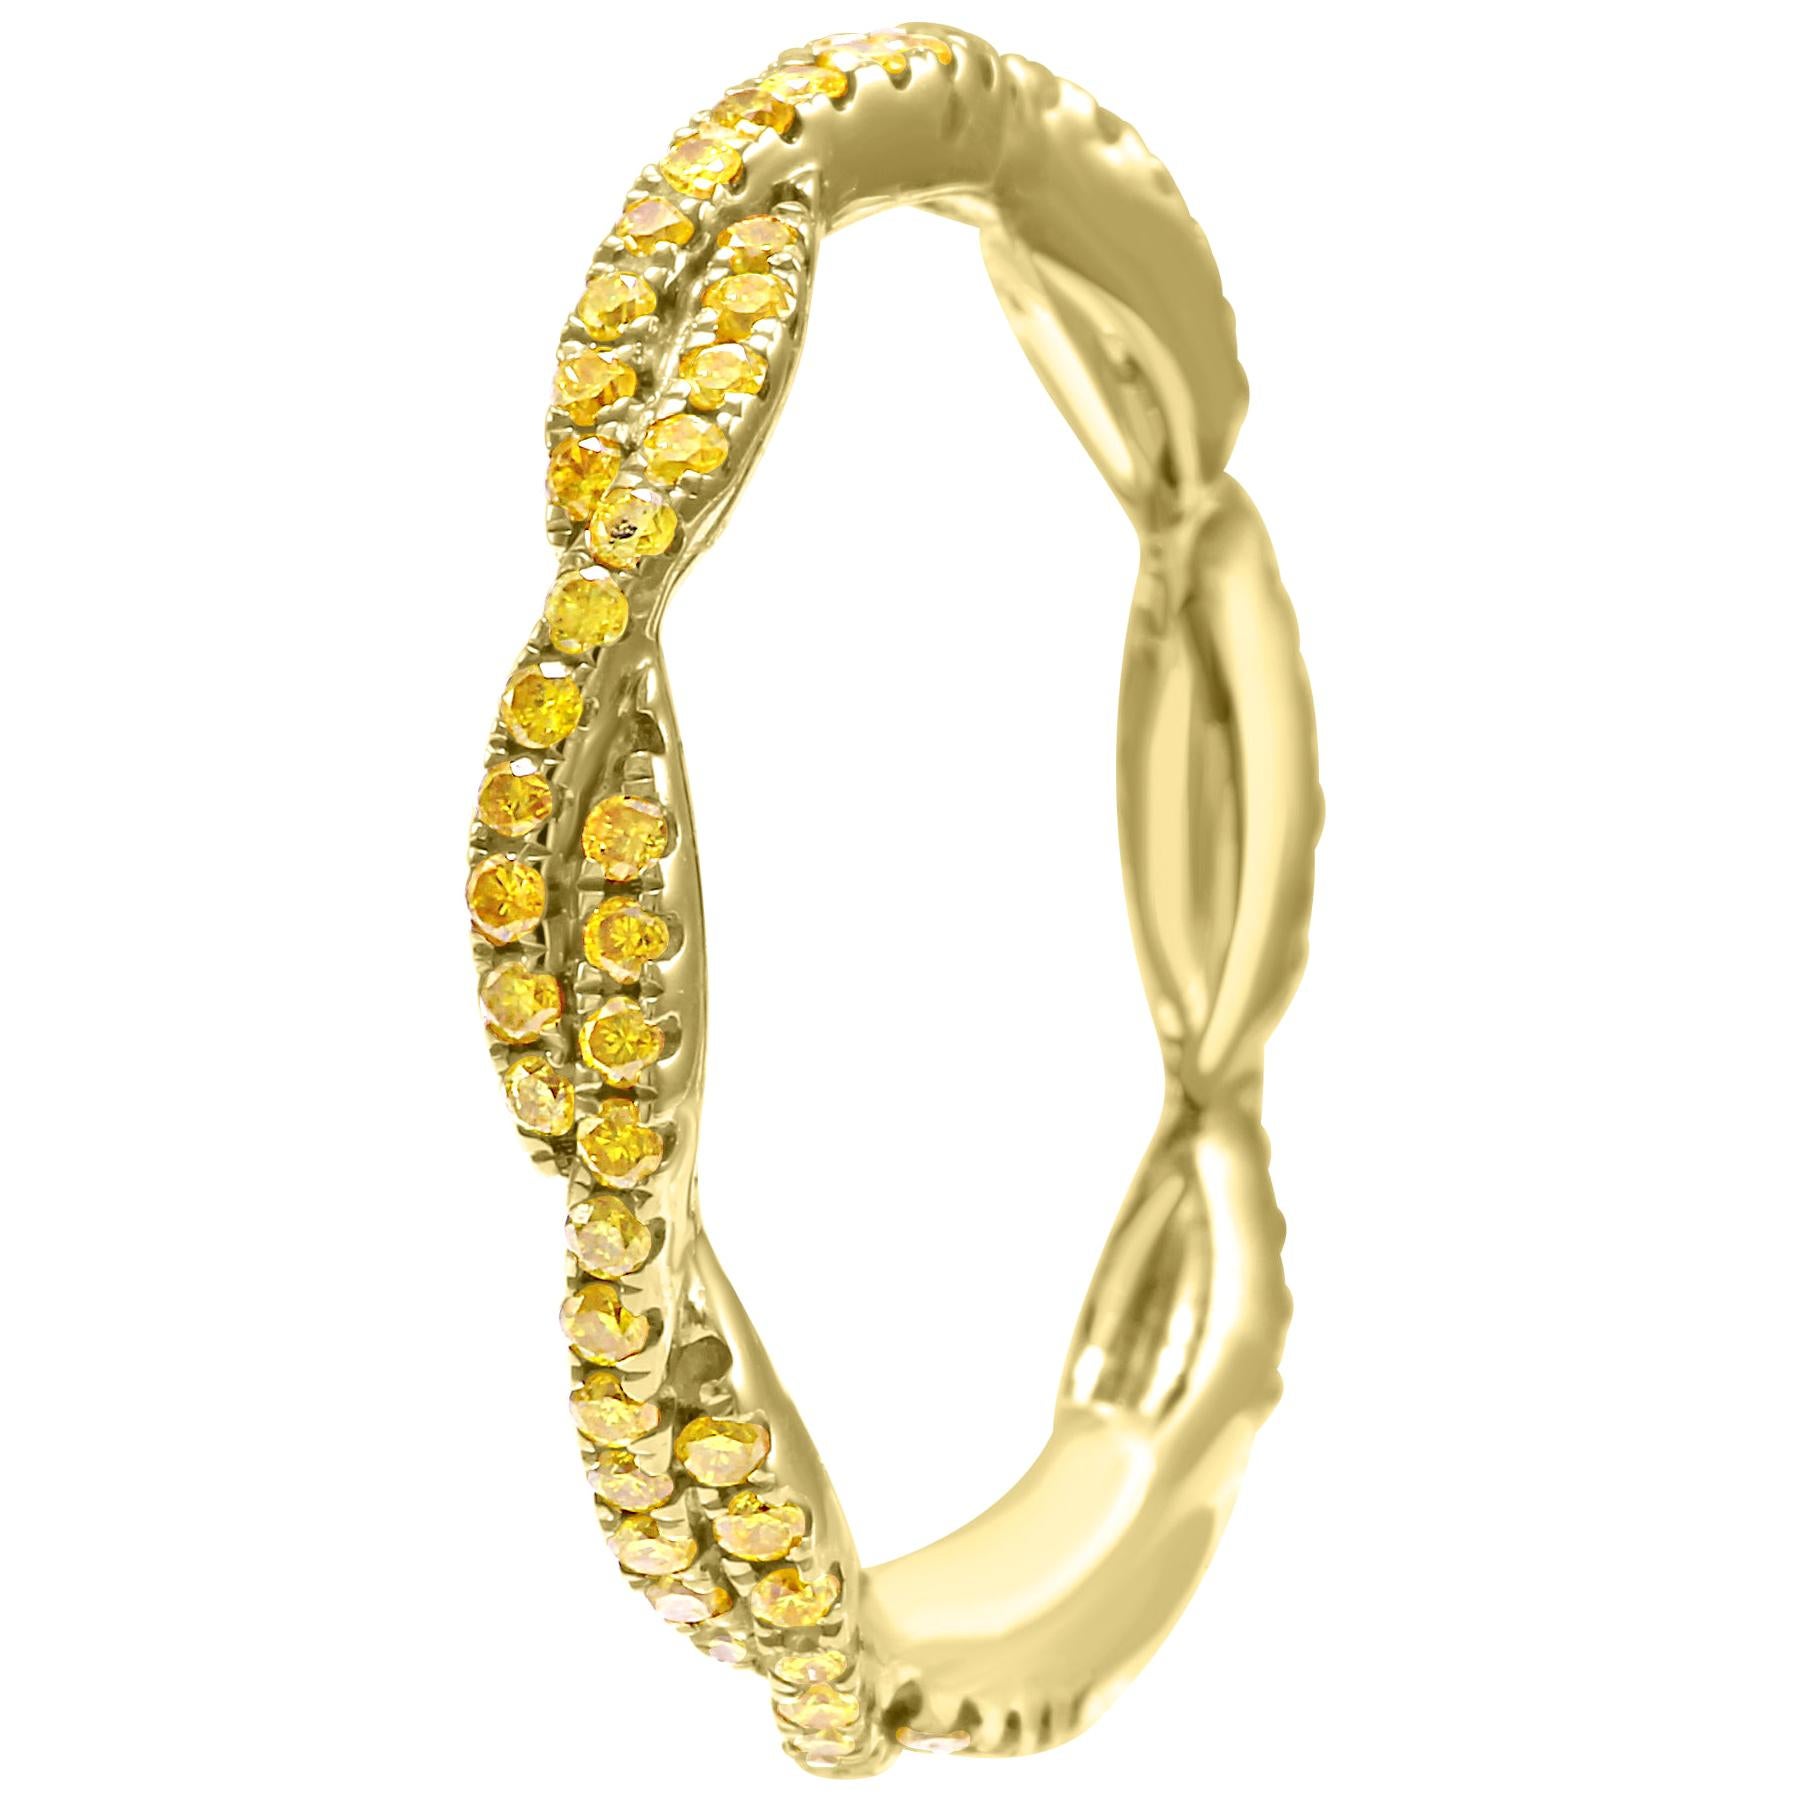 Natural Fancy Yellow Diamond Twisted Rope Style Gold Stackable Band Fashion Ring